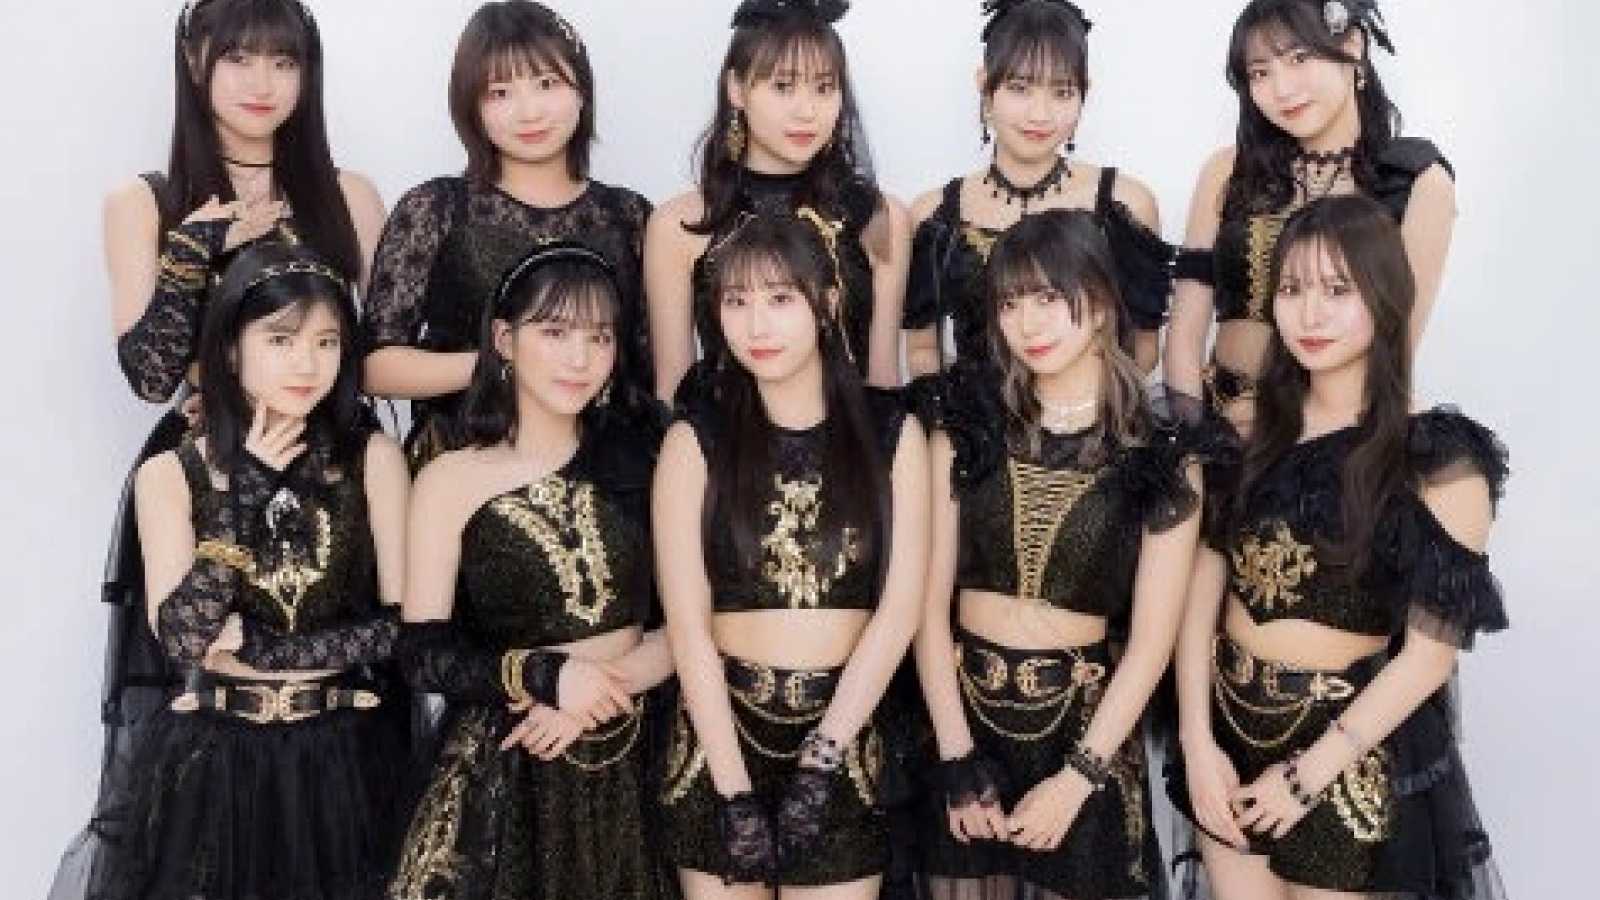 Juice=Juice © DC FACTORY. All rights reserved.